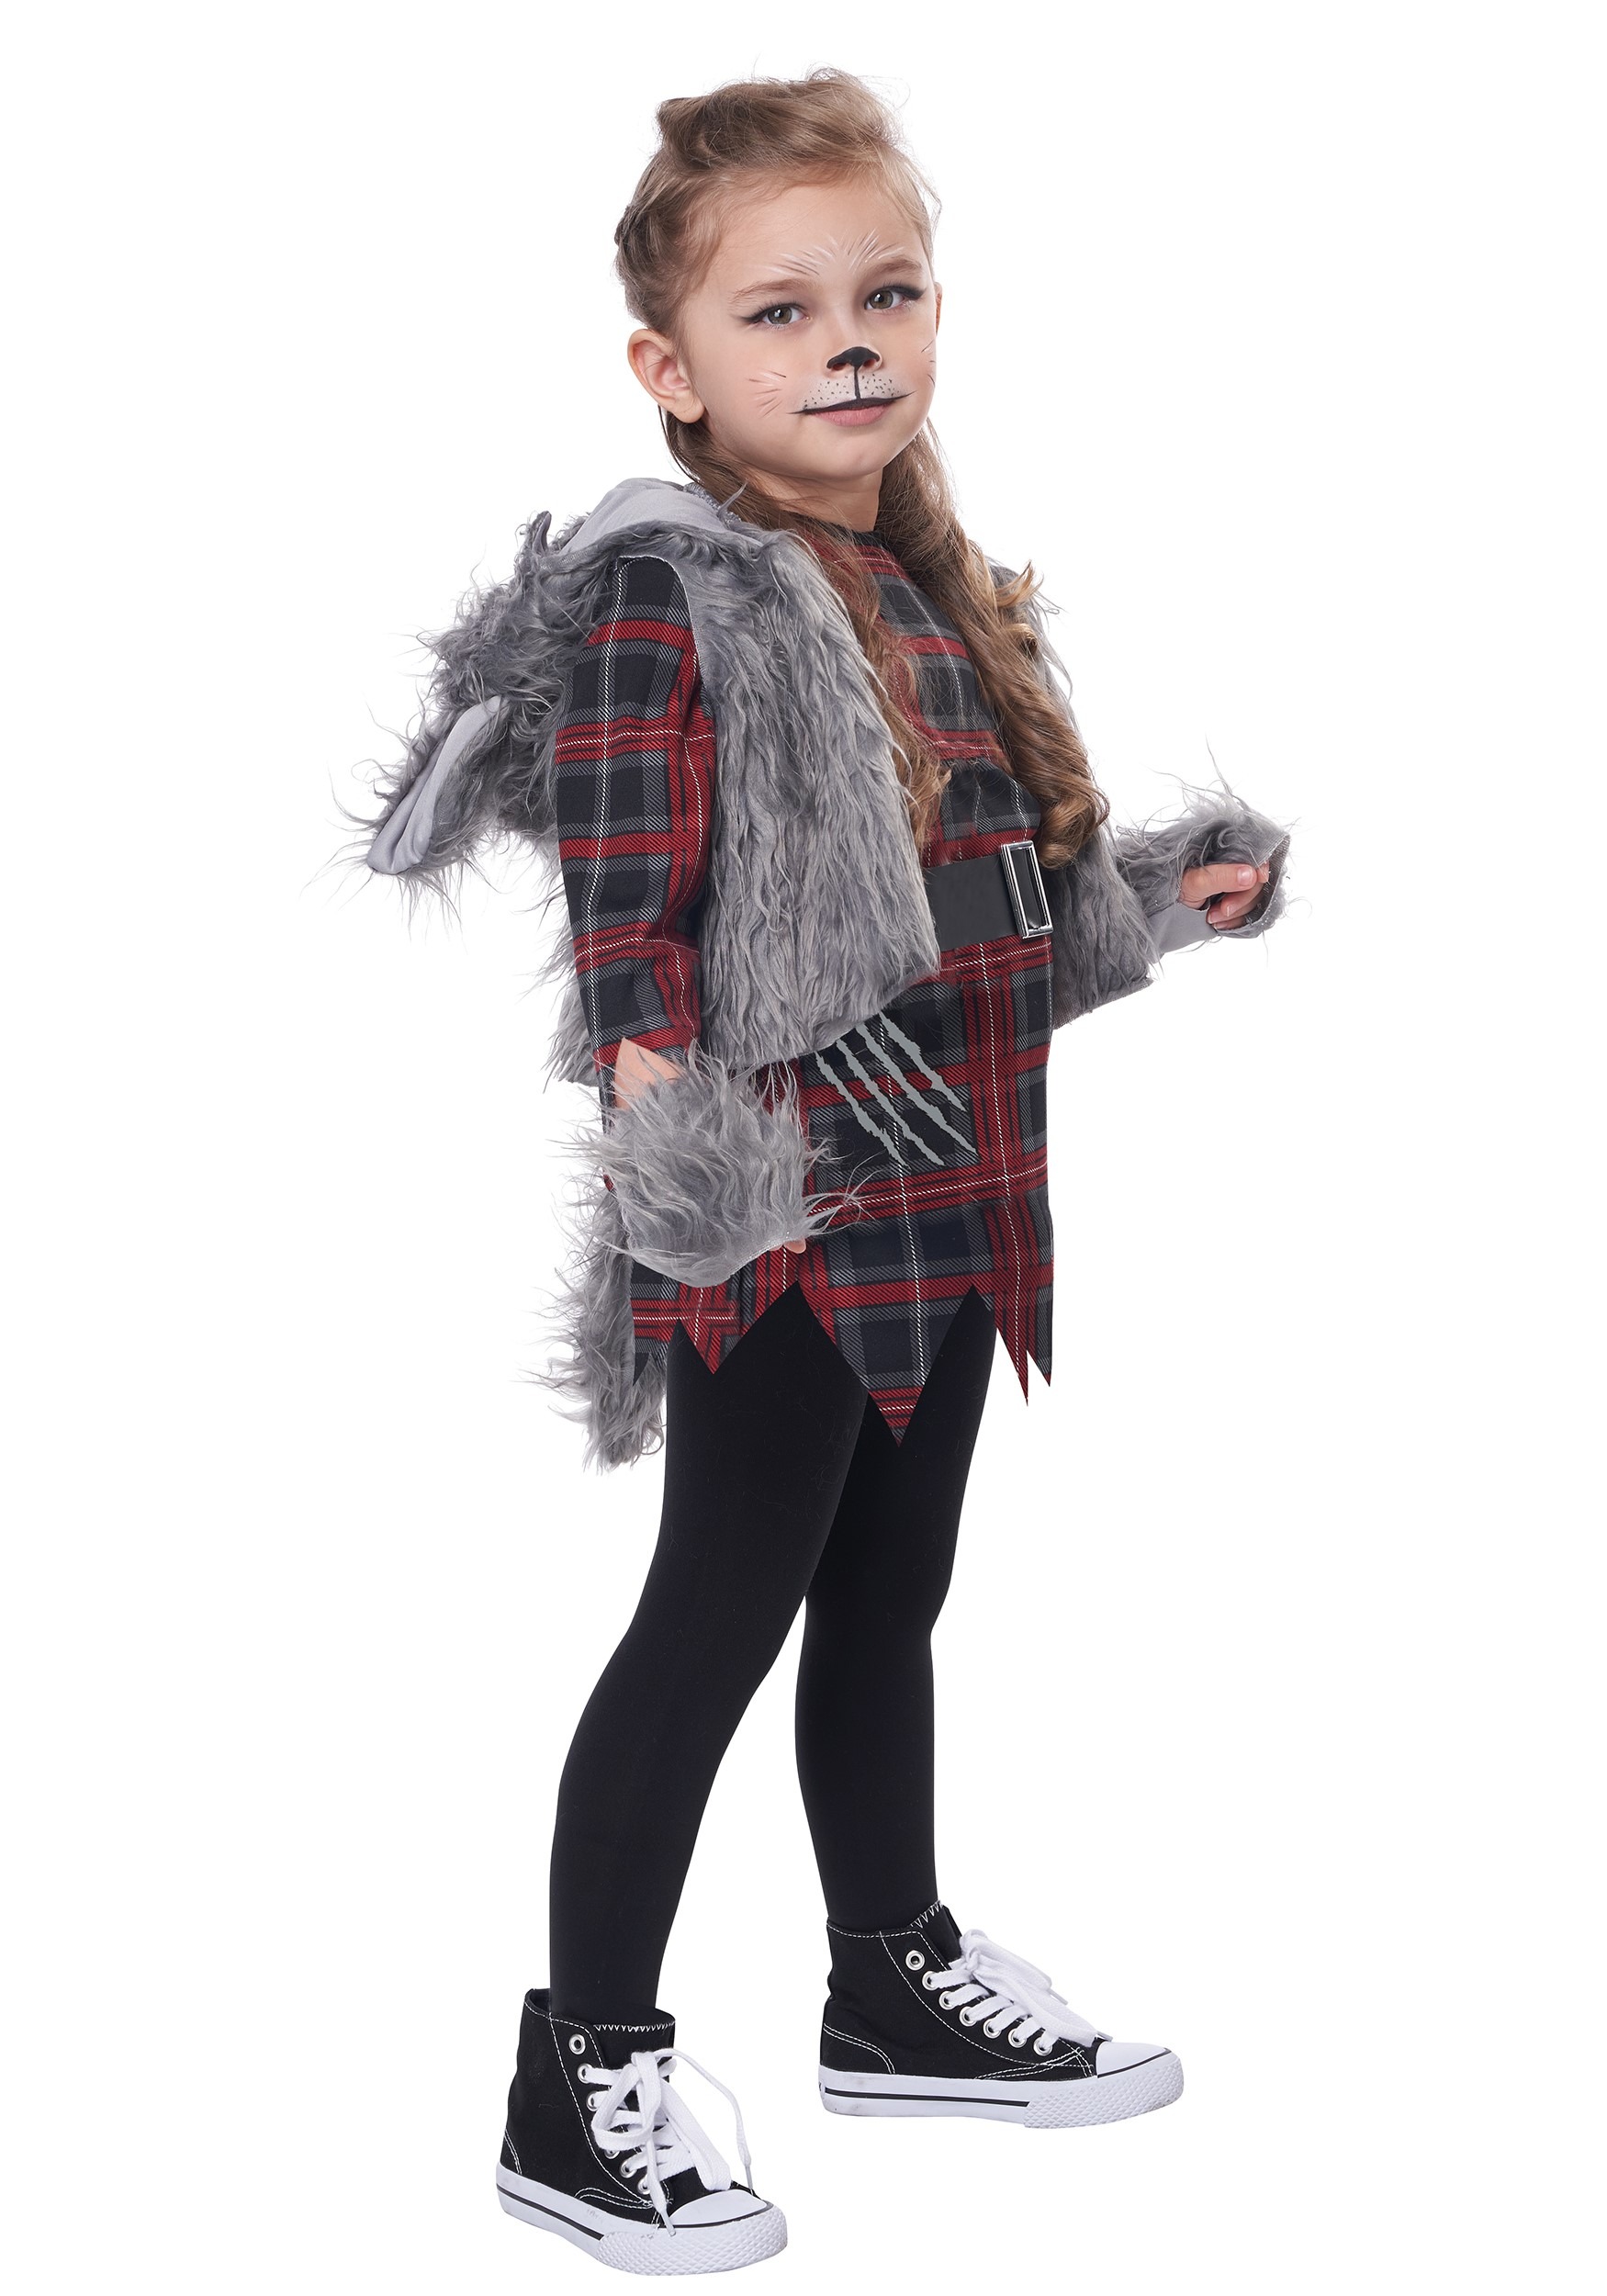 Wee-Wolf Girl's Costume